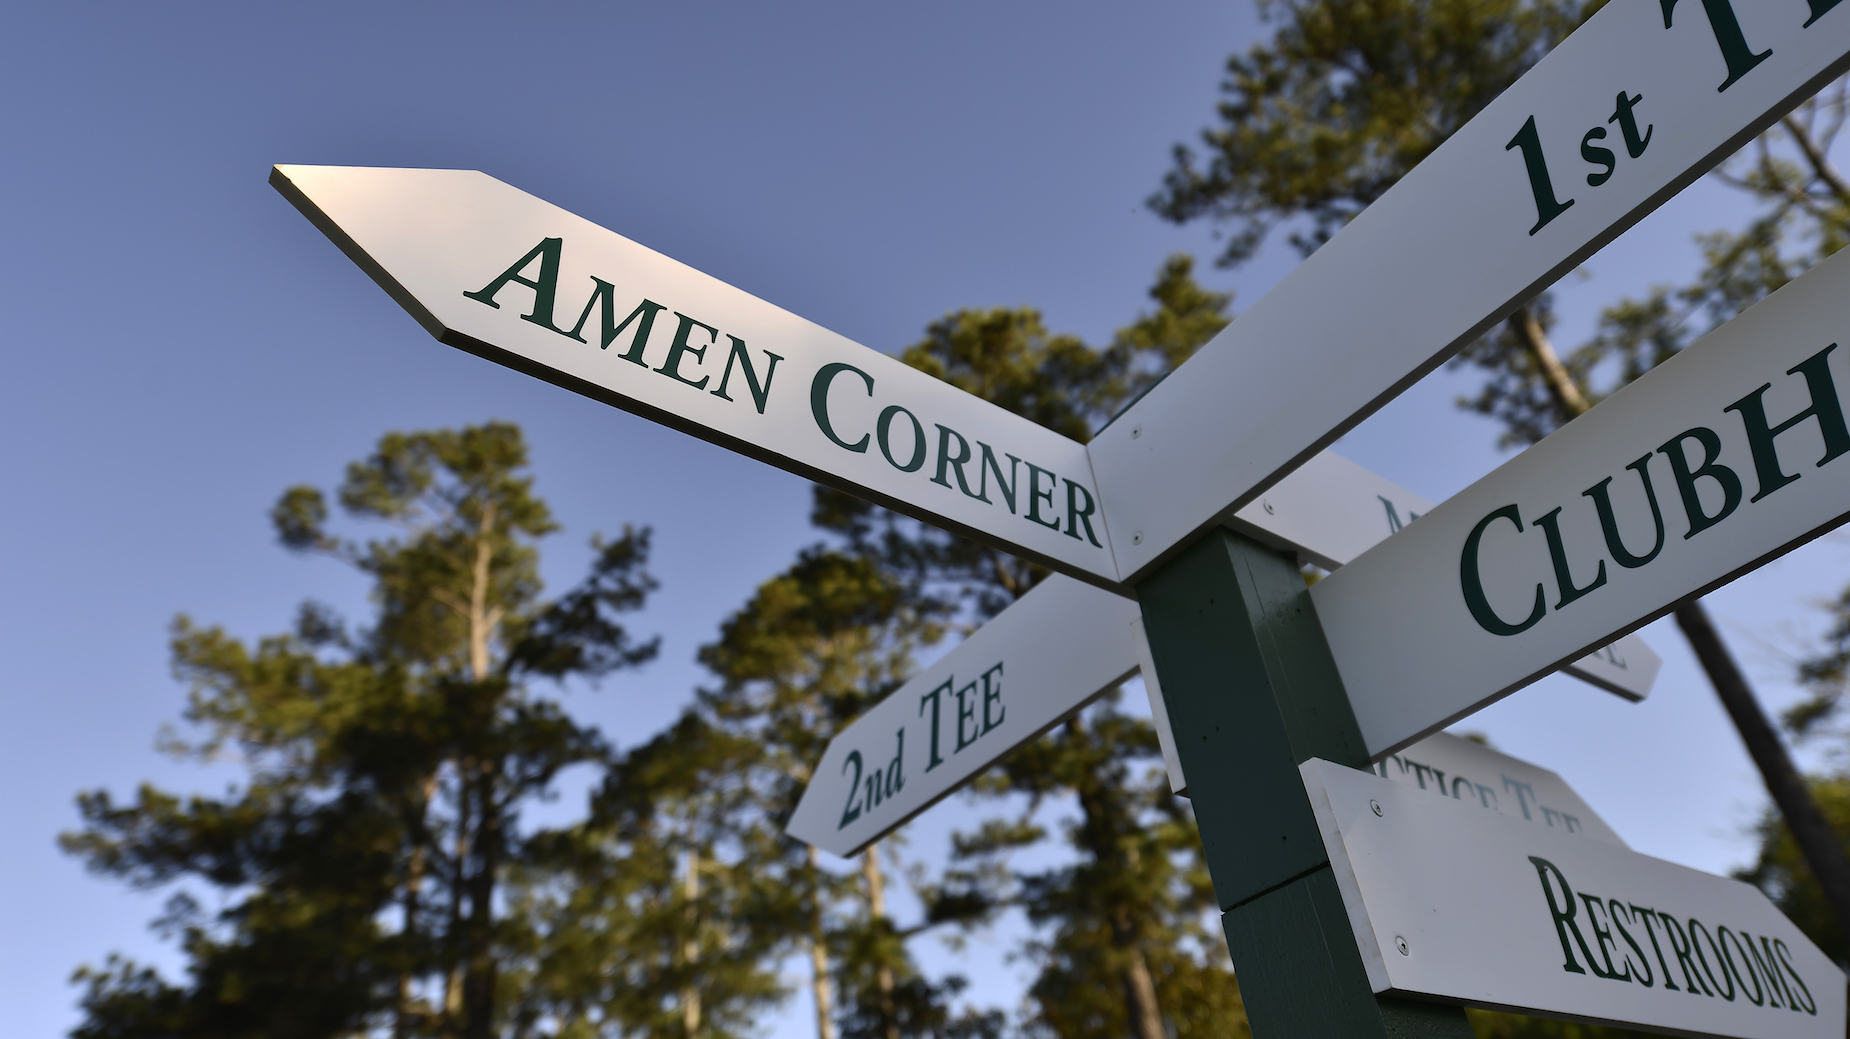 What is Amen Corner at The Masters and how did it get its name?